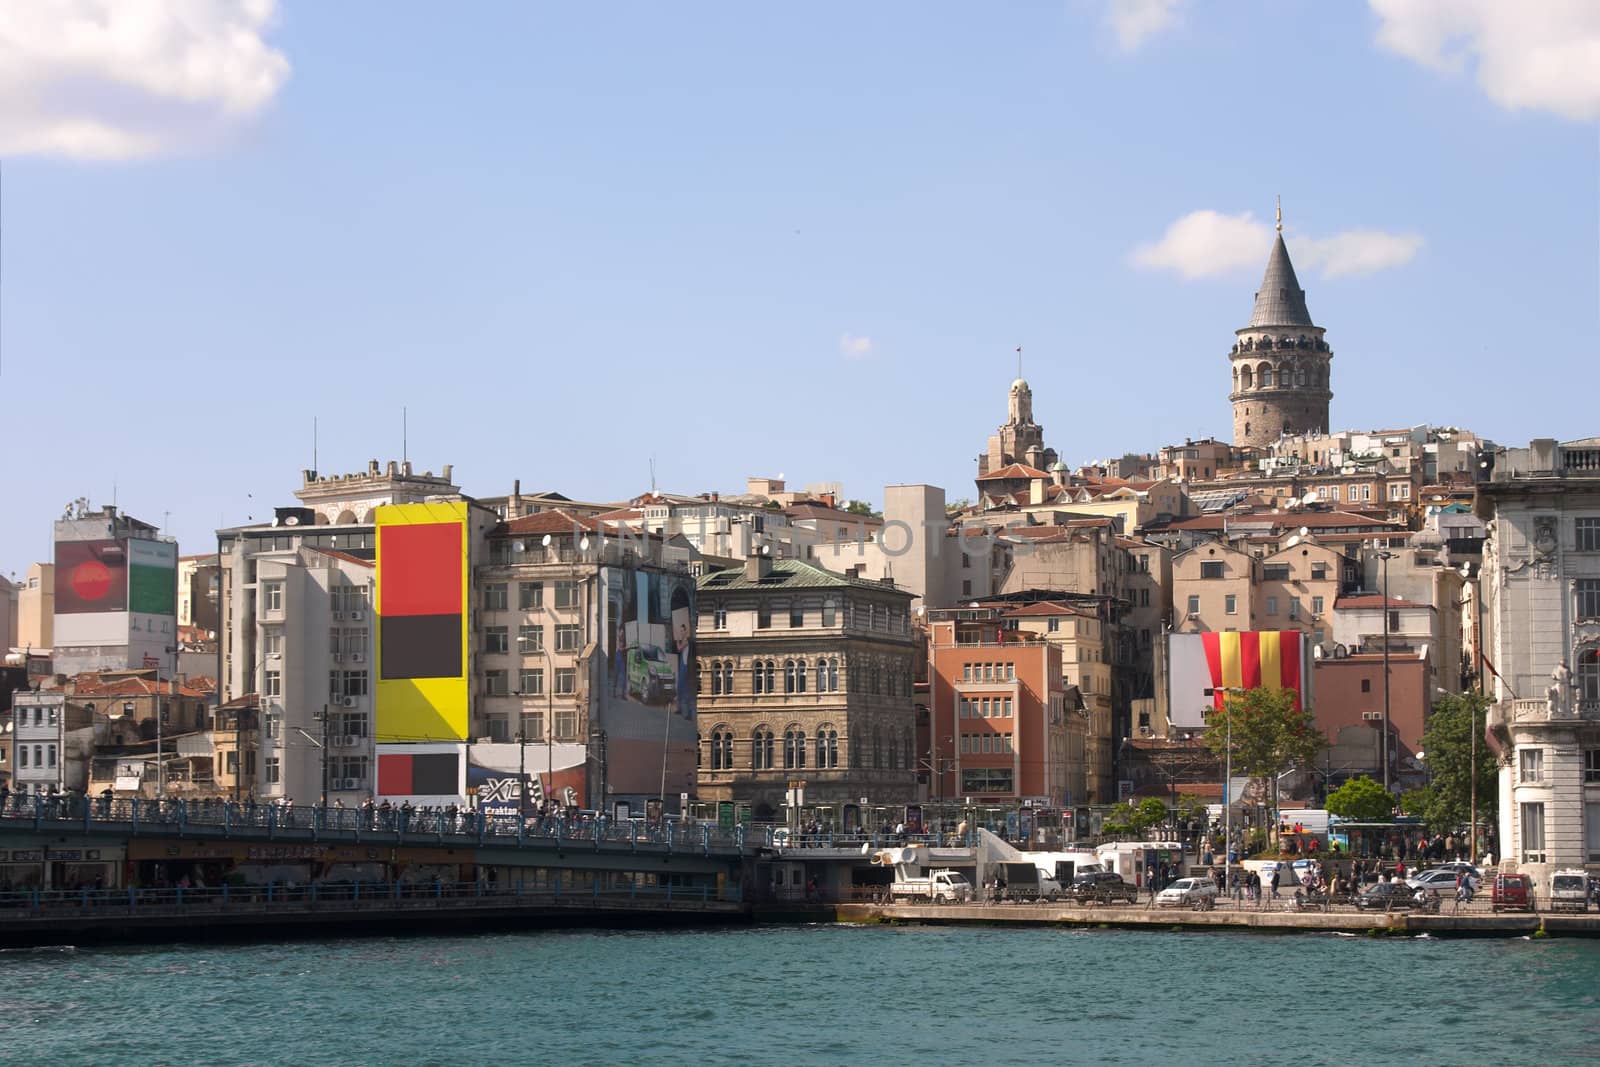 Overview Istambul with Galata tower over blue sky